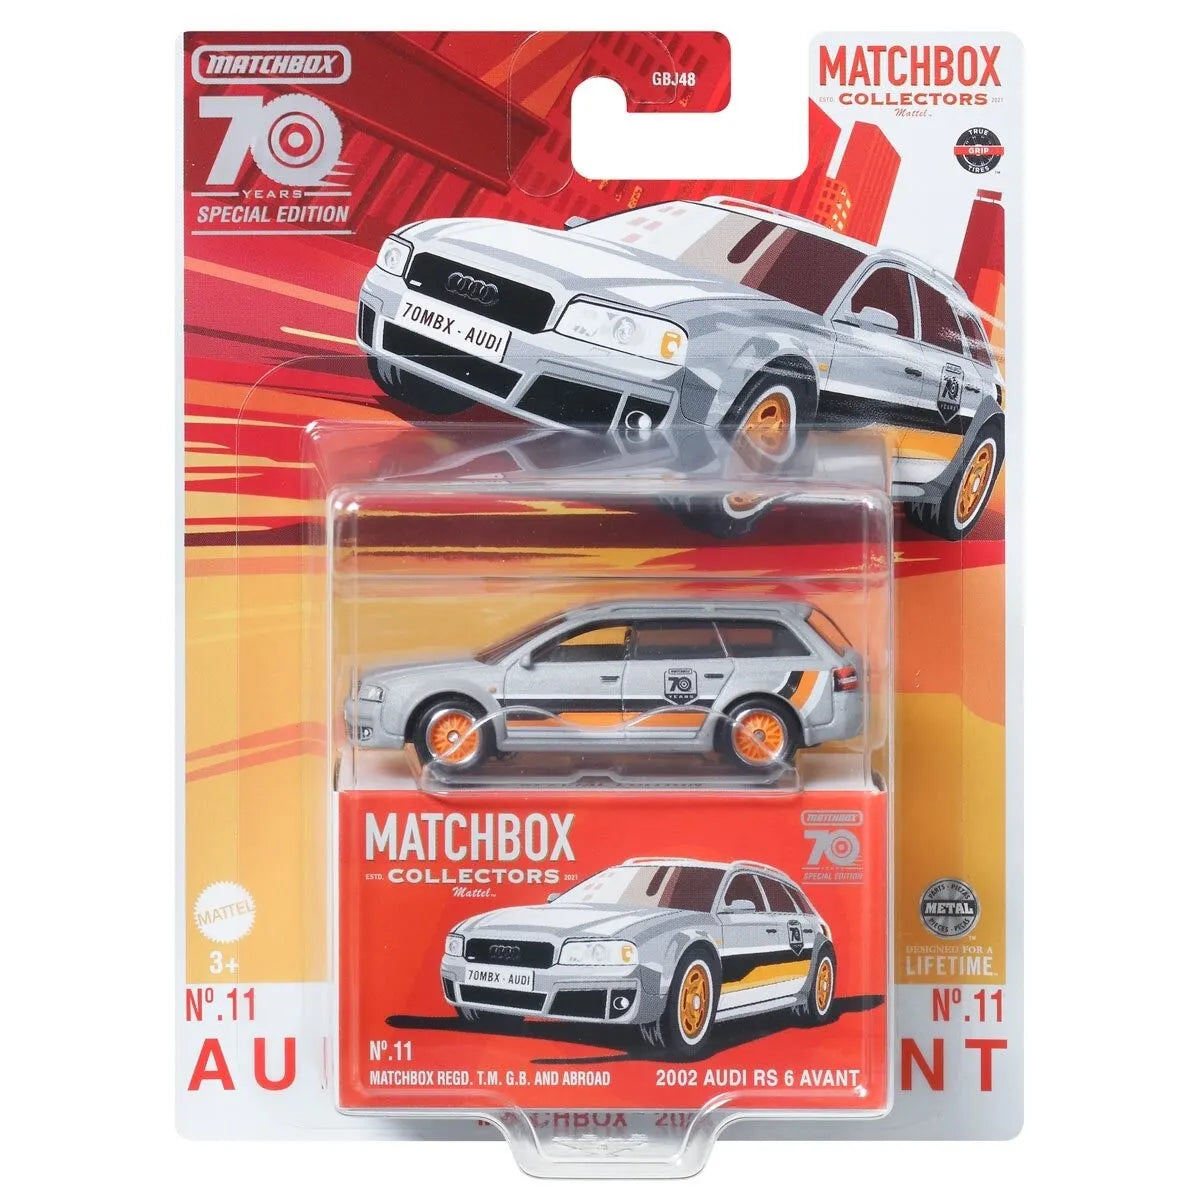 1/64 2002 AUDI RS 6 AVANT - MATCHBOX 70 YEARS SPECIAL EDITION